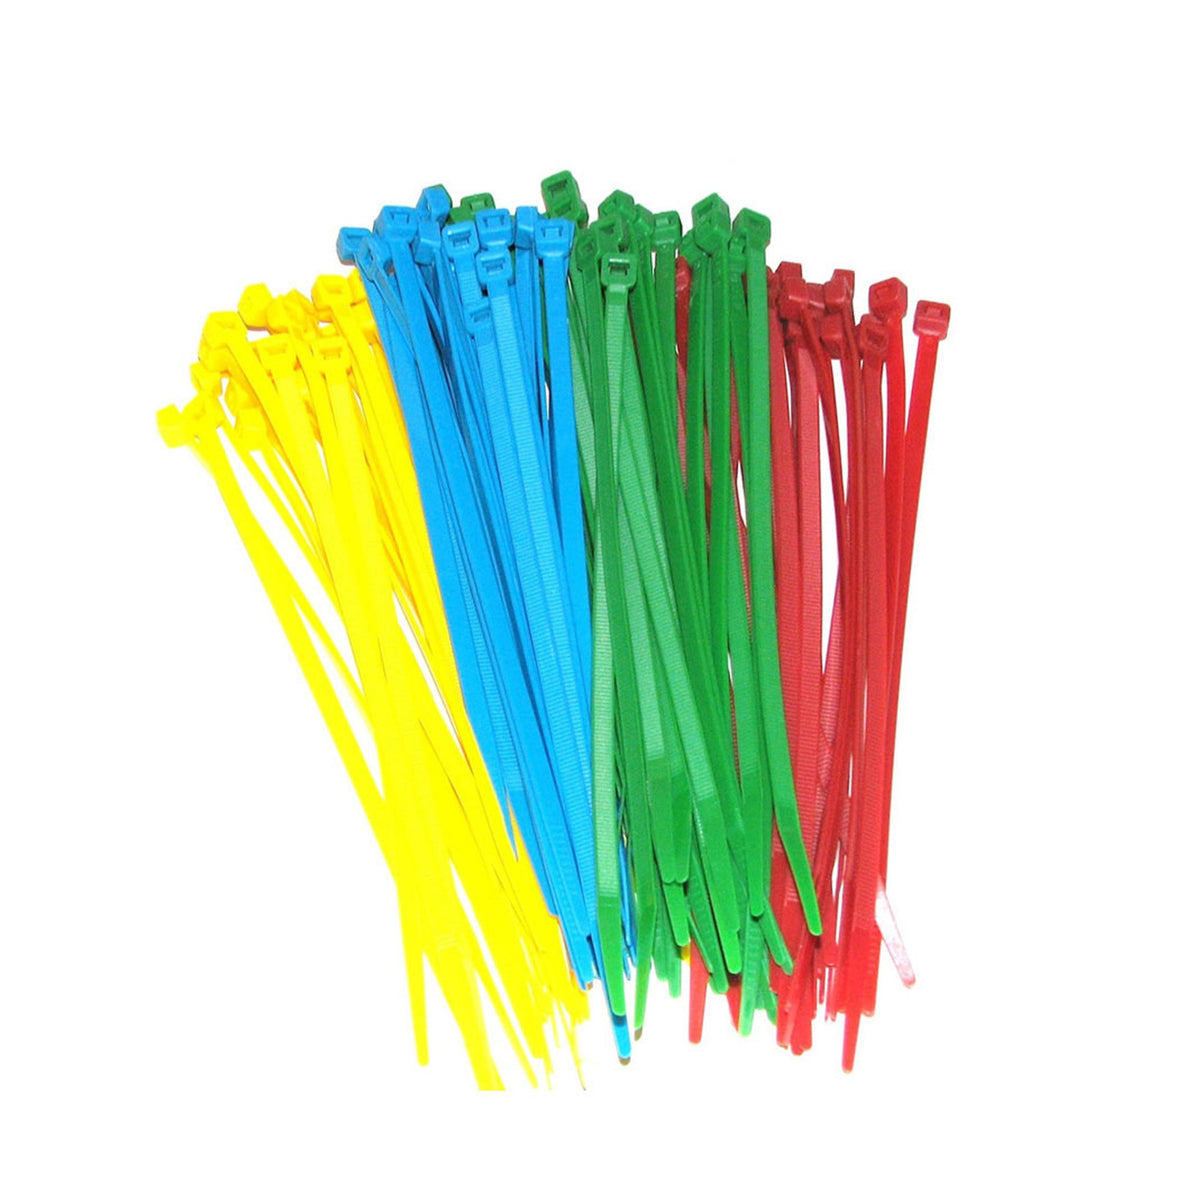 ATB TS-1198M Lot of 500 Pcs 8 in inch UV Resistant Cable Pack Zip Ties Nylon Self Locking !